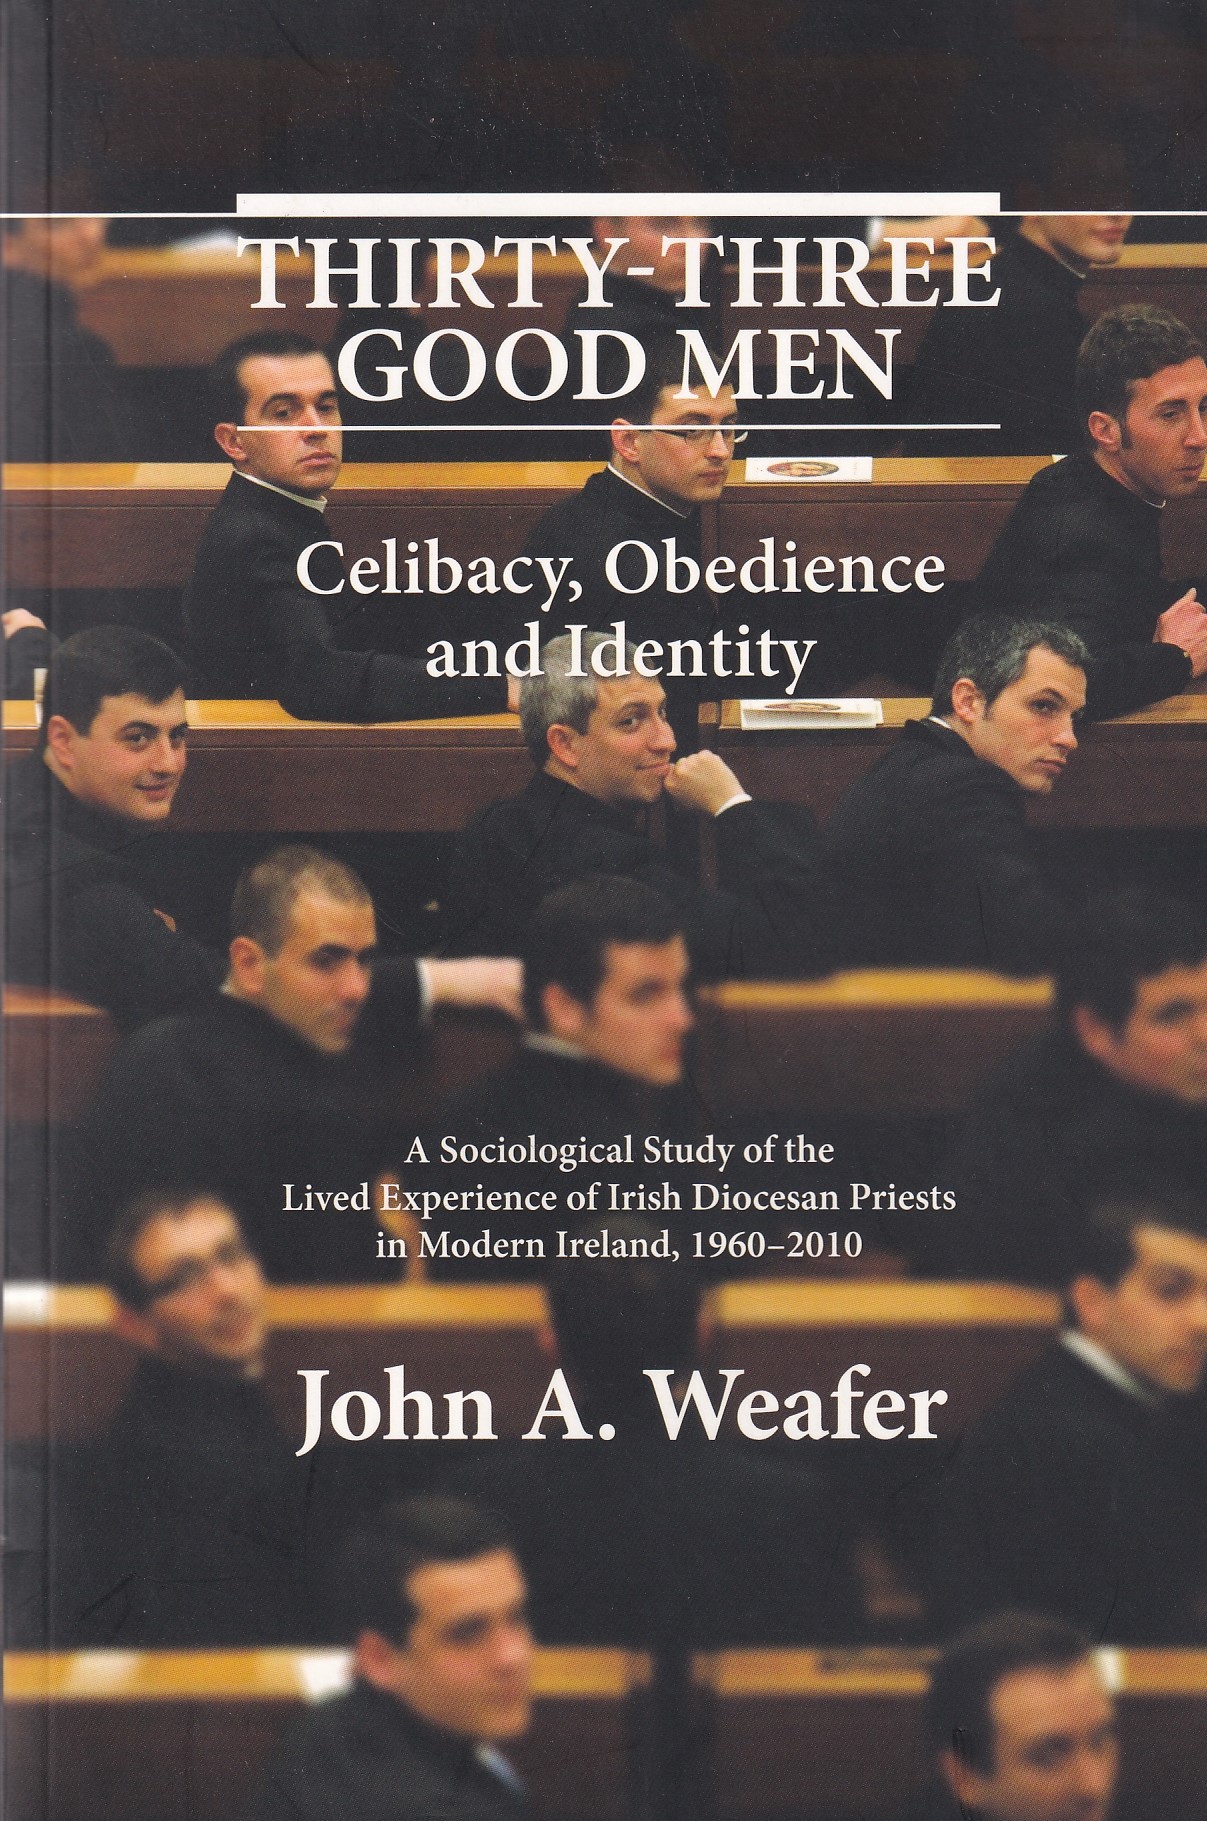 Thirty-Three Good Men: Celibacy, Obedience and Identity | John A. Weafer | Charlie Byrne's